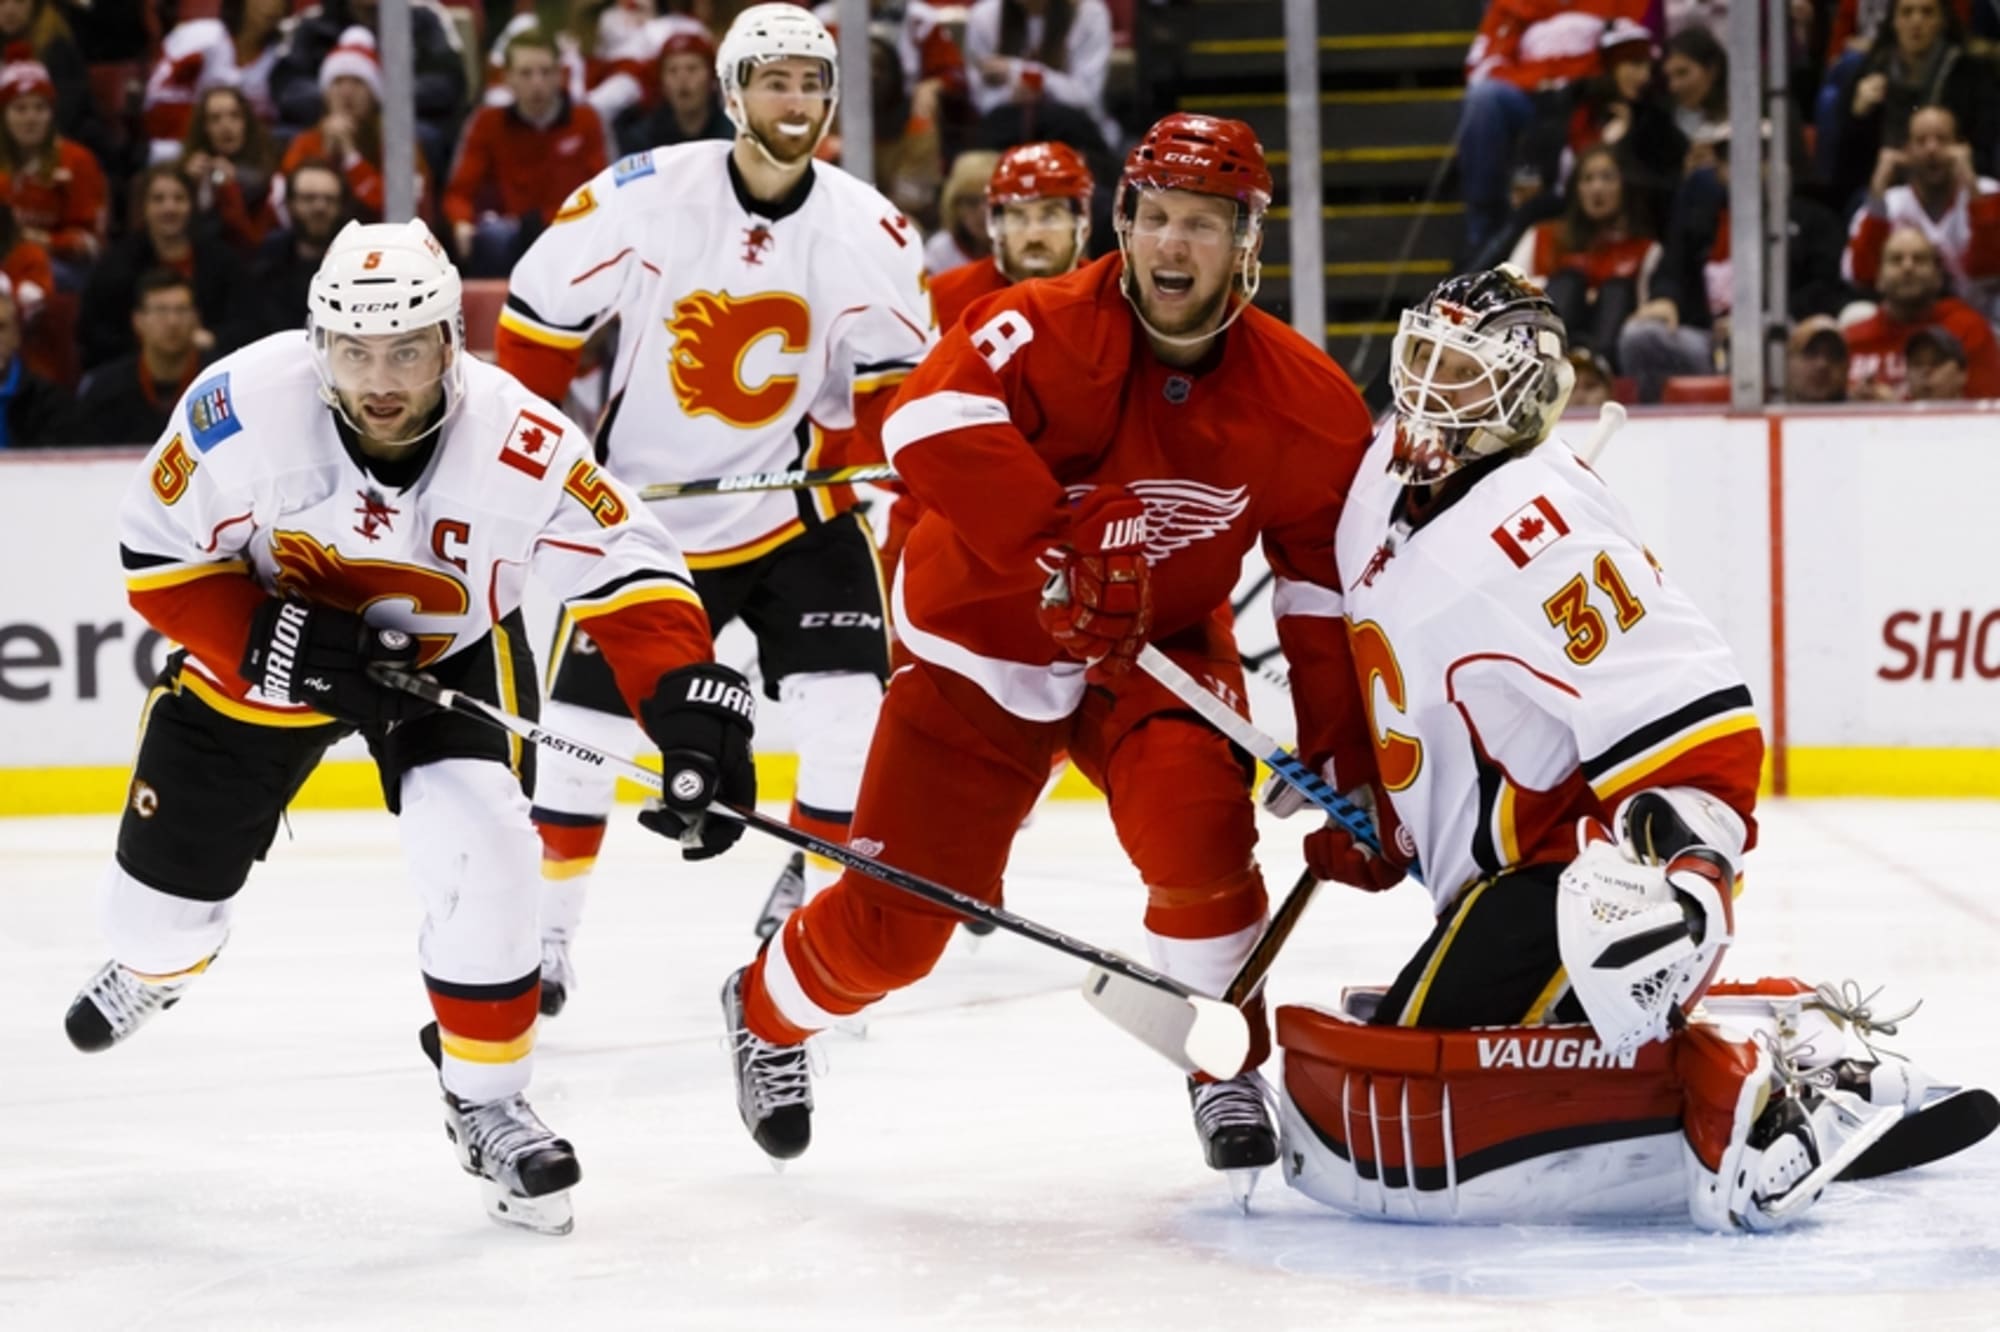 How to Watch the Red Wings vs. Flames Game: Streaming & TV Info